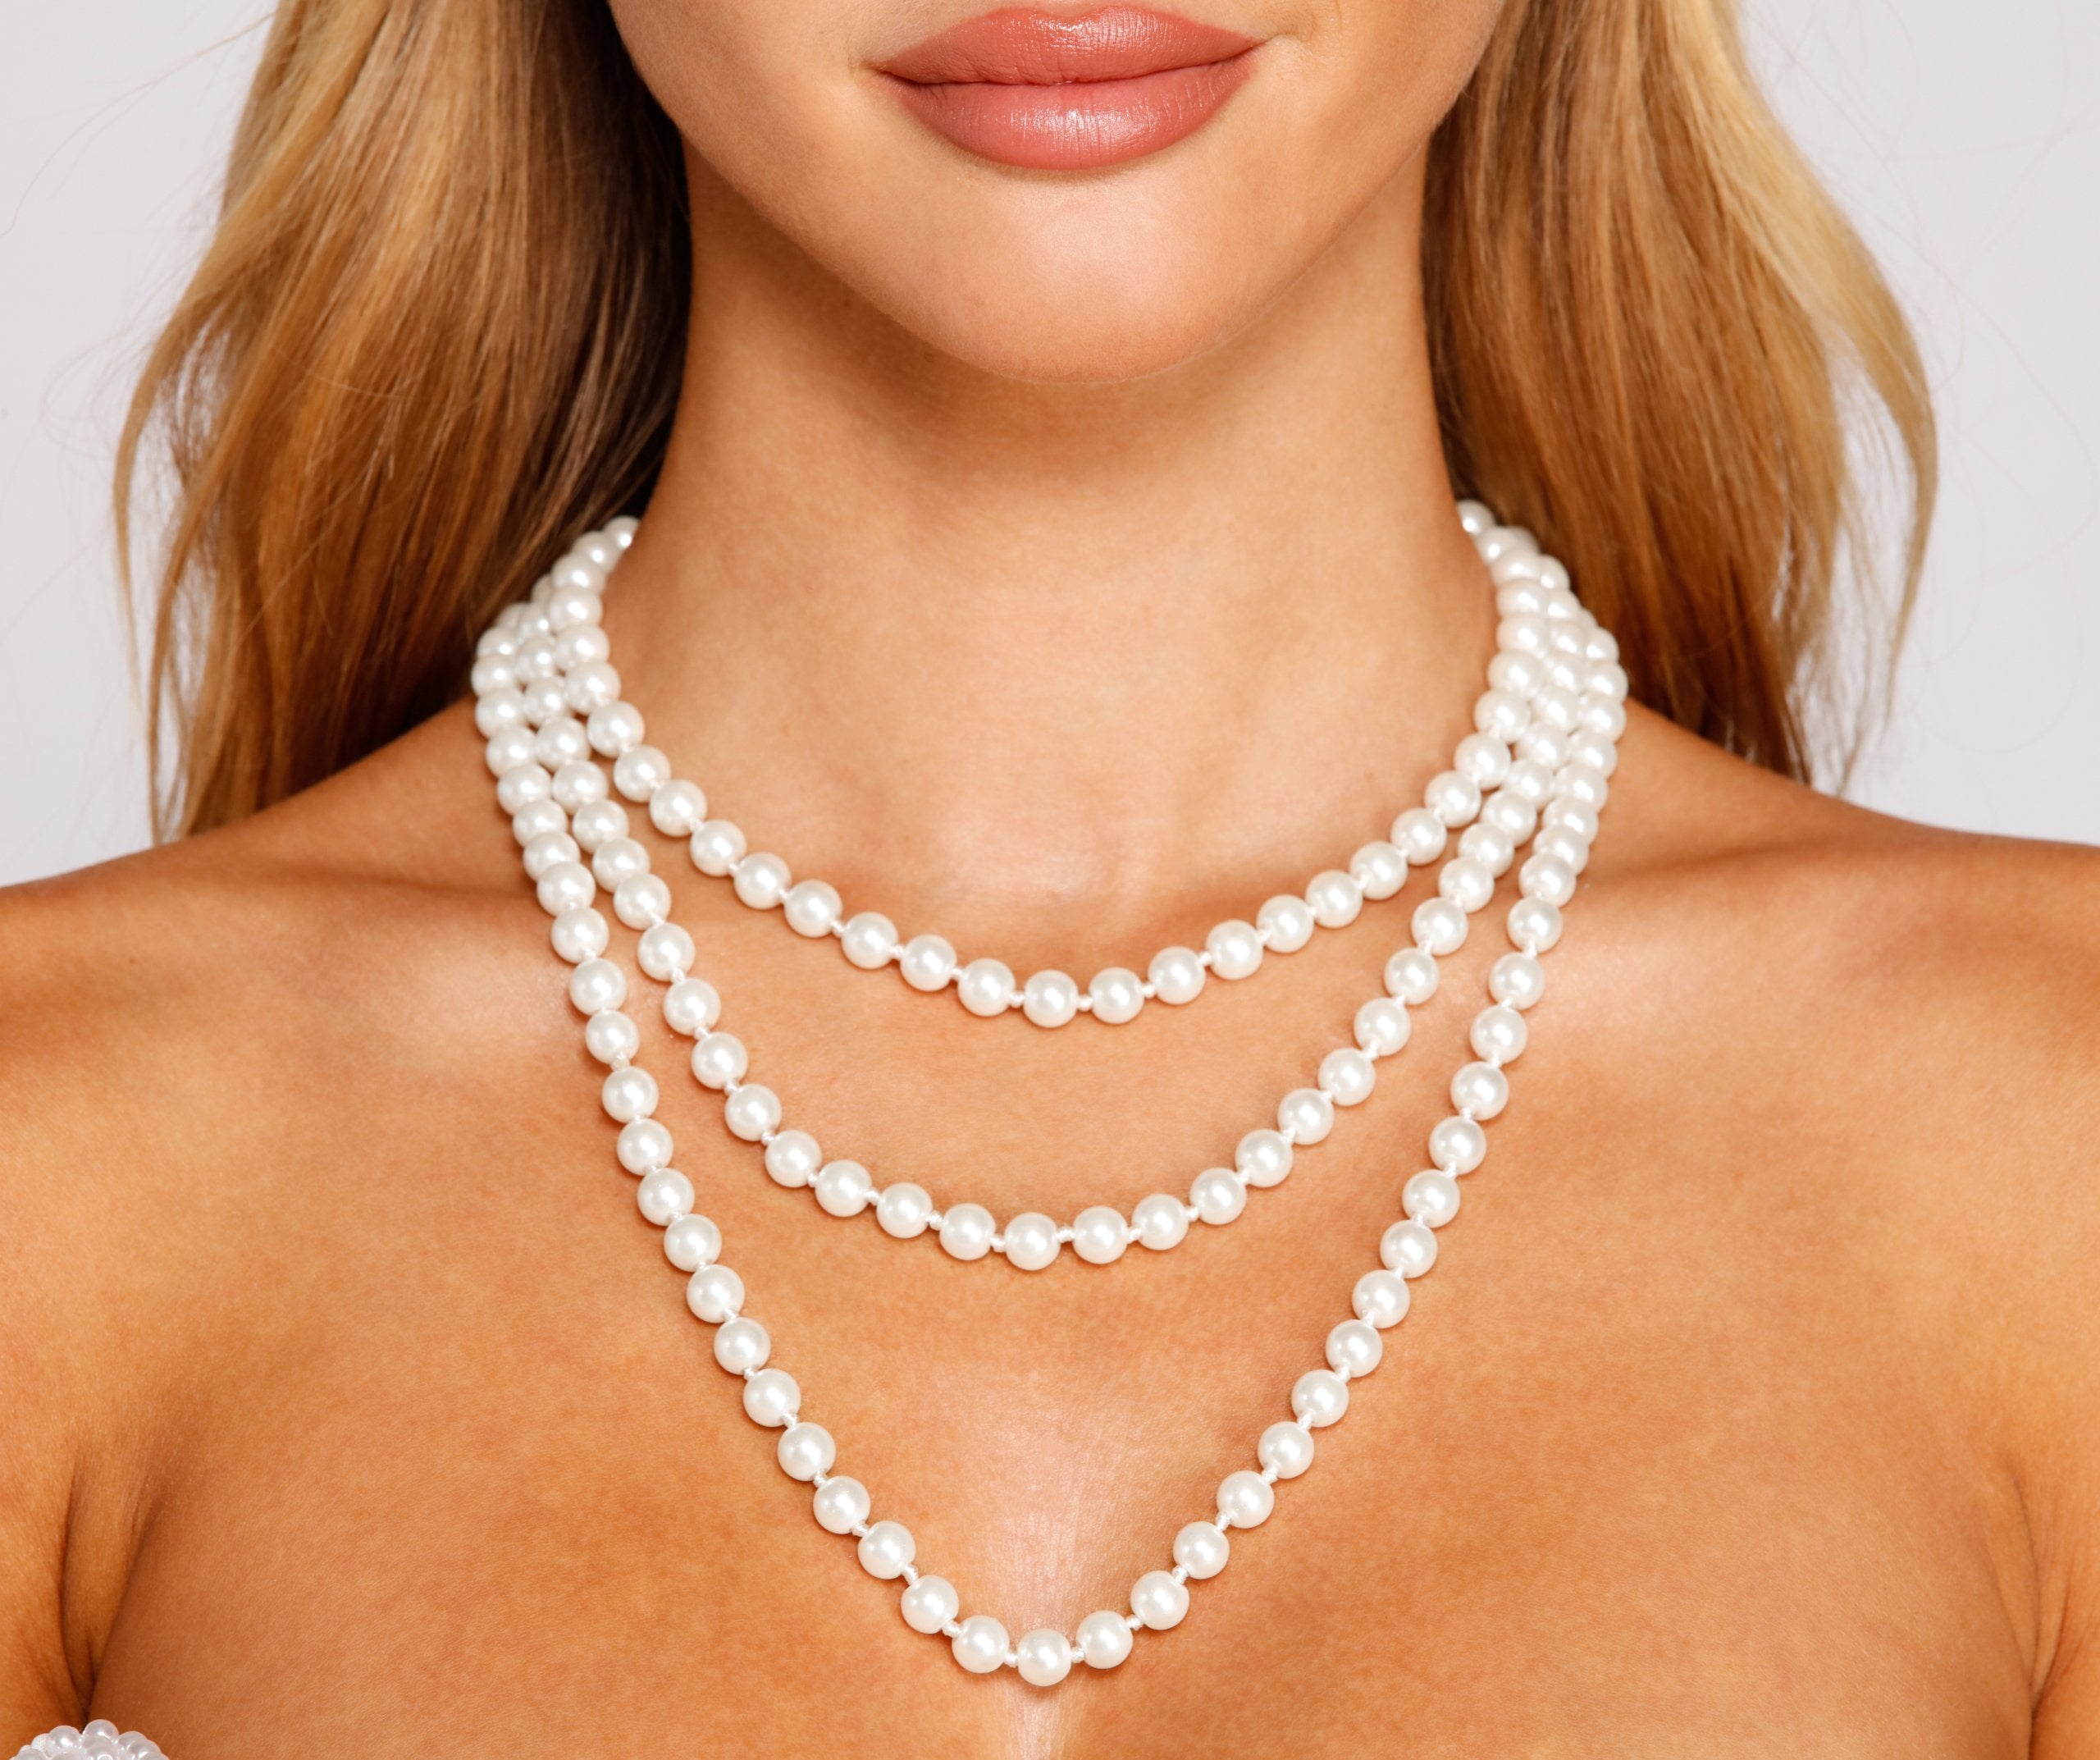 Classic Chic Layered Faux Pearl Necklace